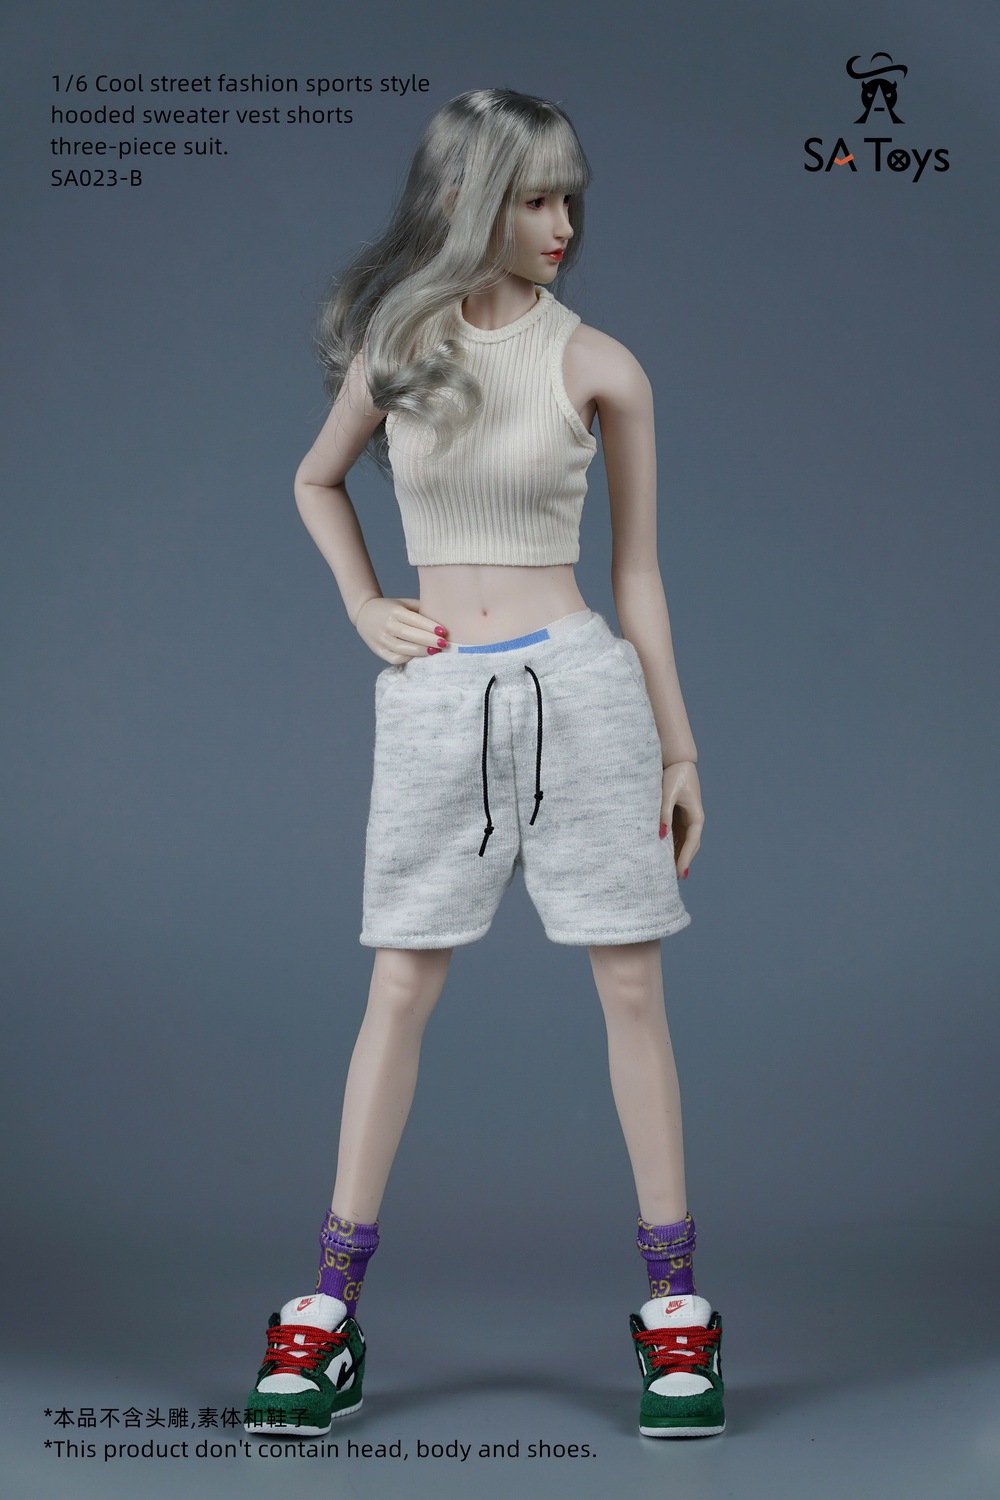 SAToys - NEW PRODUCT: SA Toys: 1/6 hip skirt / floral elastic skirt / fashionable sports style hooded sweater cover, hip-hop fisherman hat halter and footwear casual pants [variety optional] 17020111